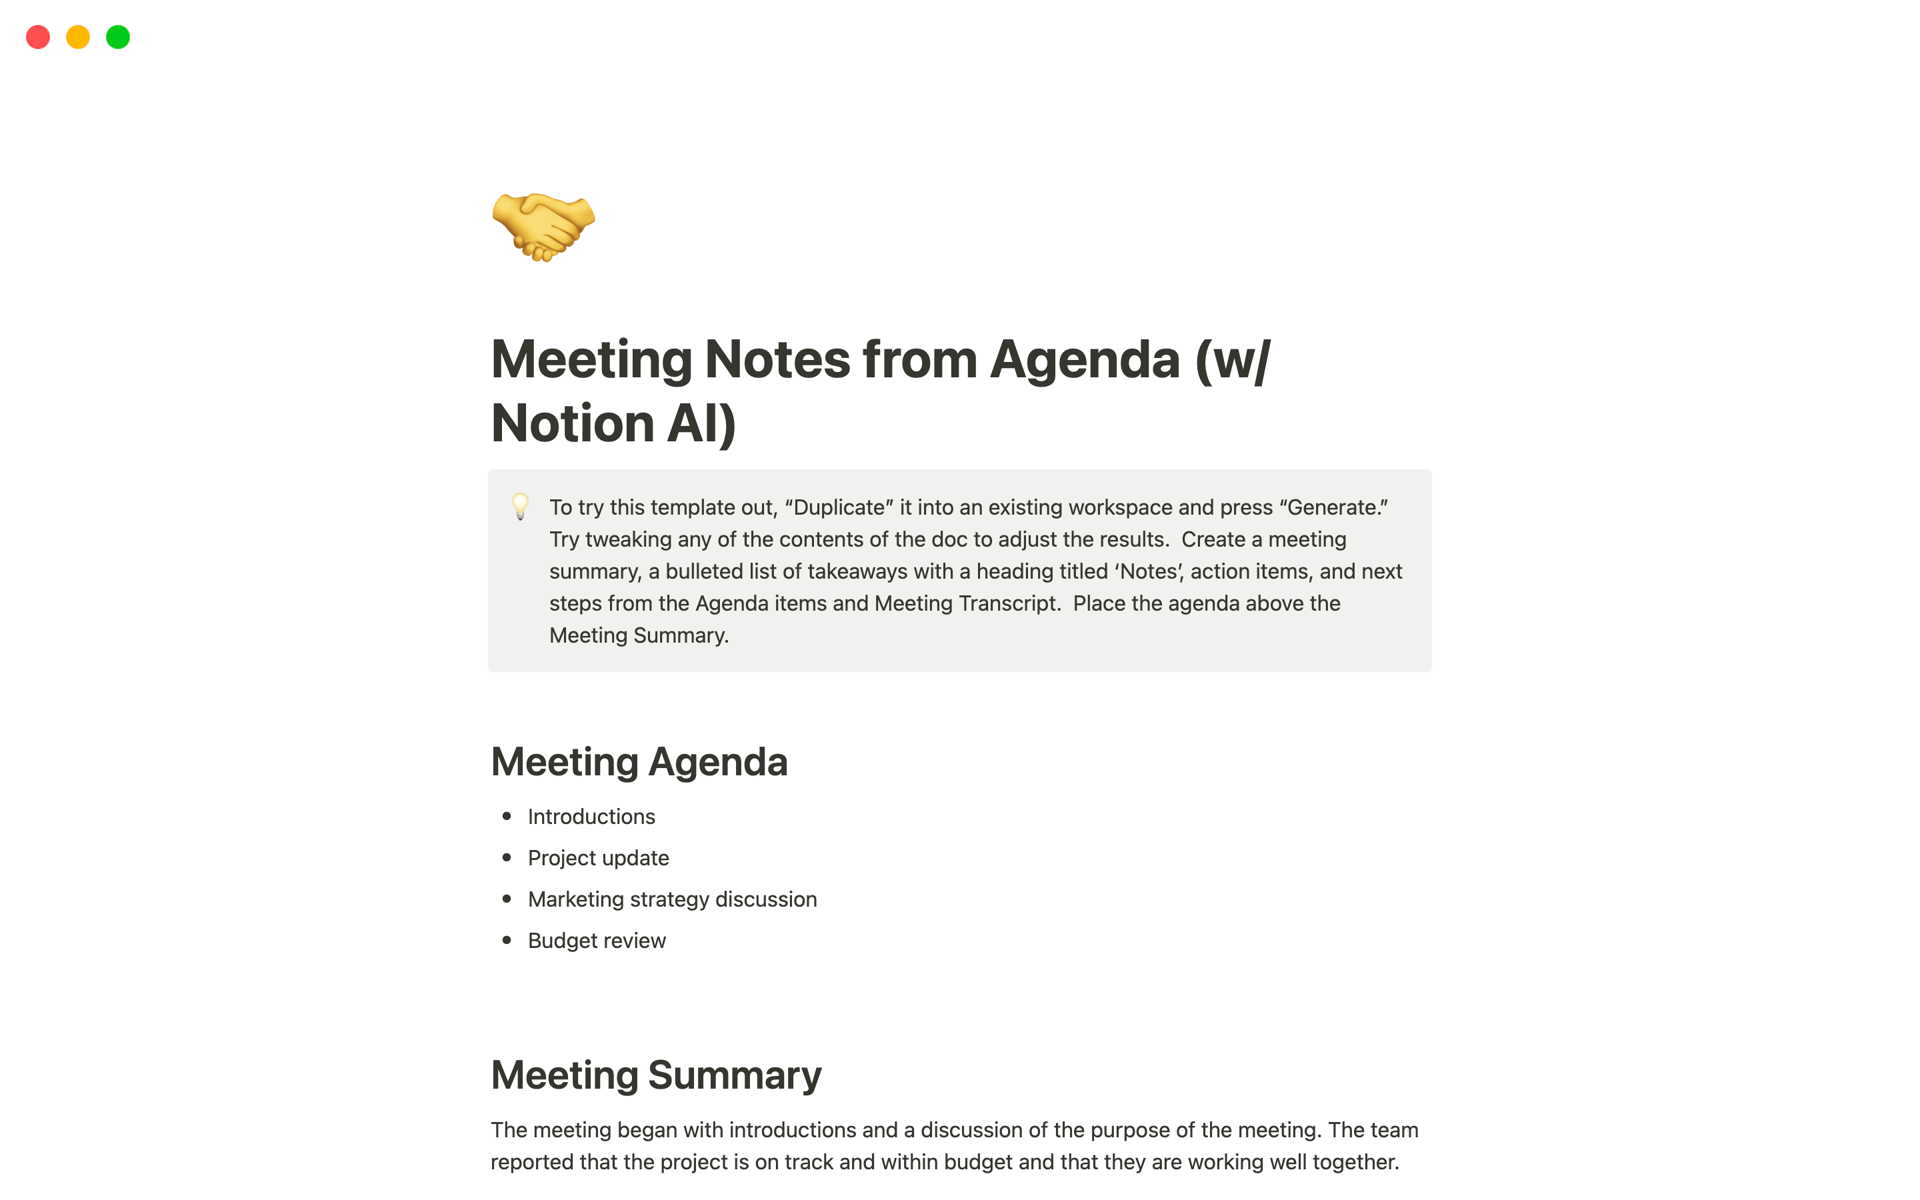 meeting-notes-from-agenda-w-notion-ai-angela-pmp-csm-desktop